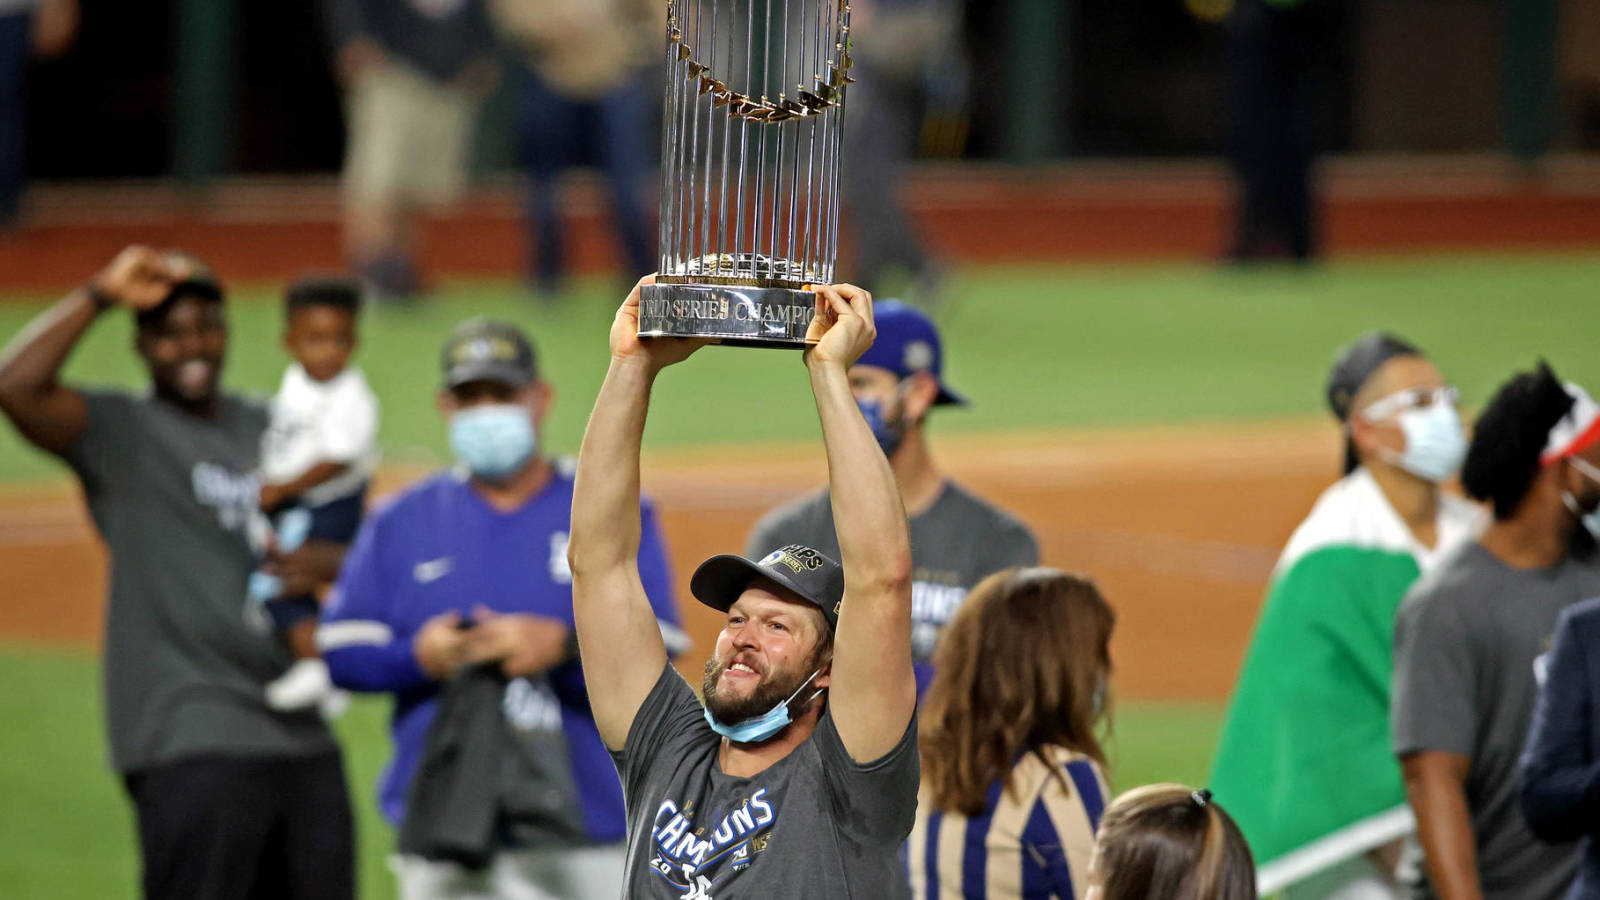 Dodgers favored to repeat as World Series champions